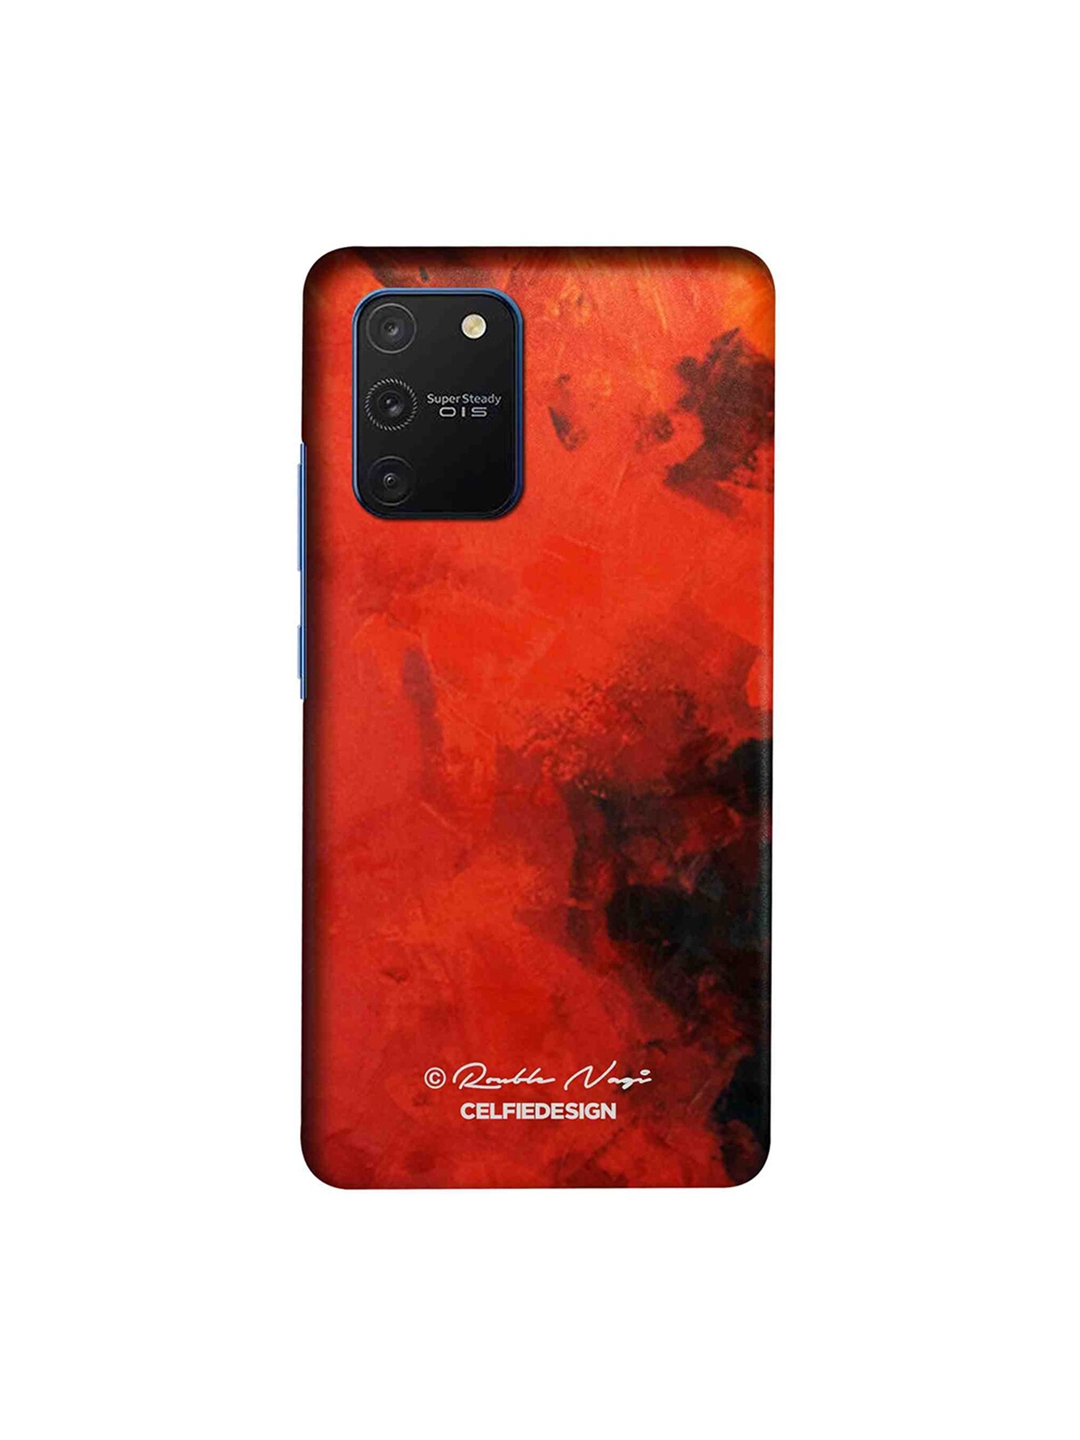 CelfieDesign Red on Me Samsung Galaxy S10 Lite Back Cover Rouble Nagi